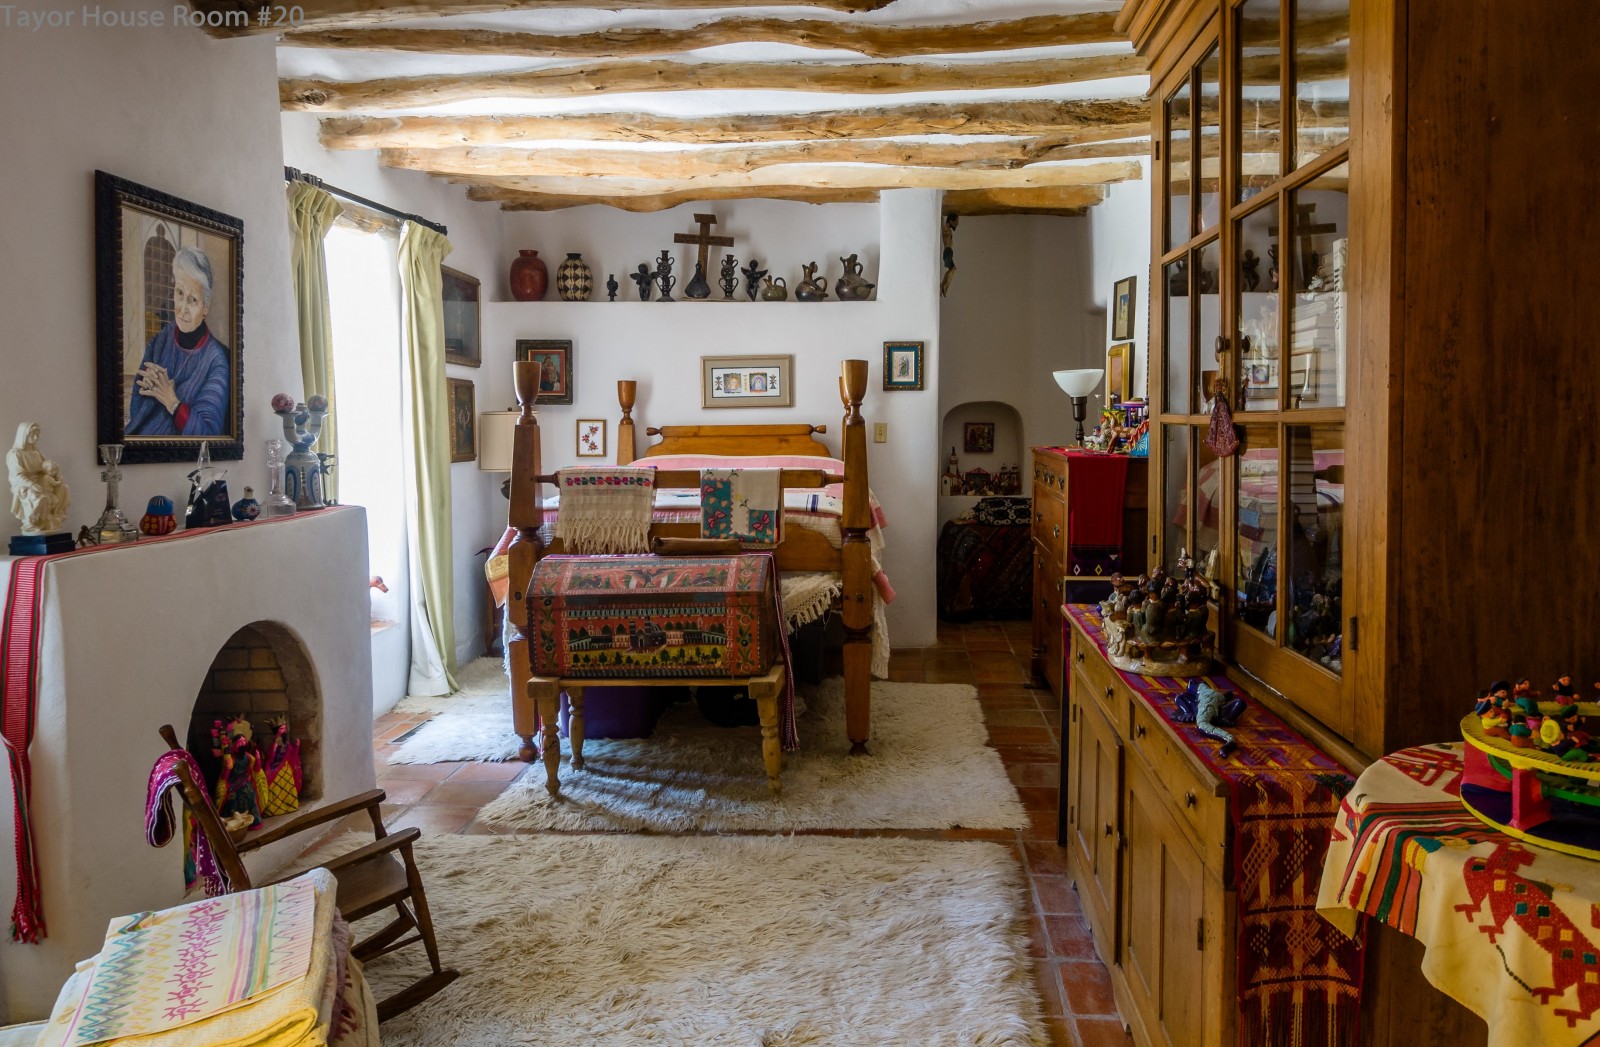 The Guest Bedroom at the Taylor-Mesilla Historic Property. Photo by Tom Conelly.